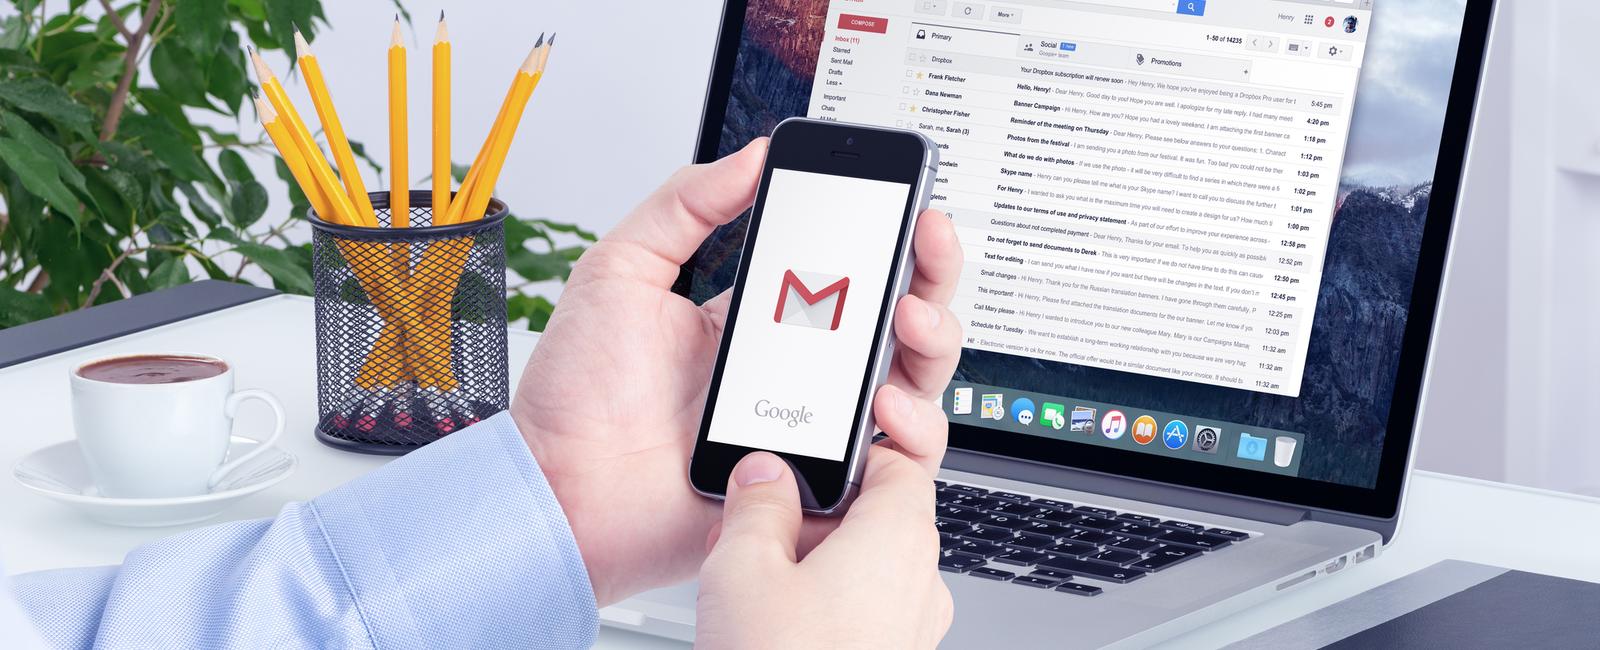 How to Set Up a HIPAA-Compliant Gmail Account for Doctors | Step-by-Step Tutorial